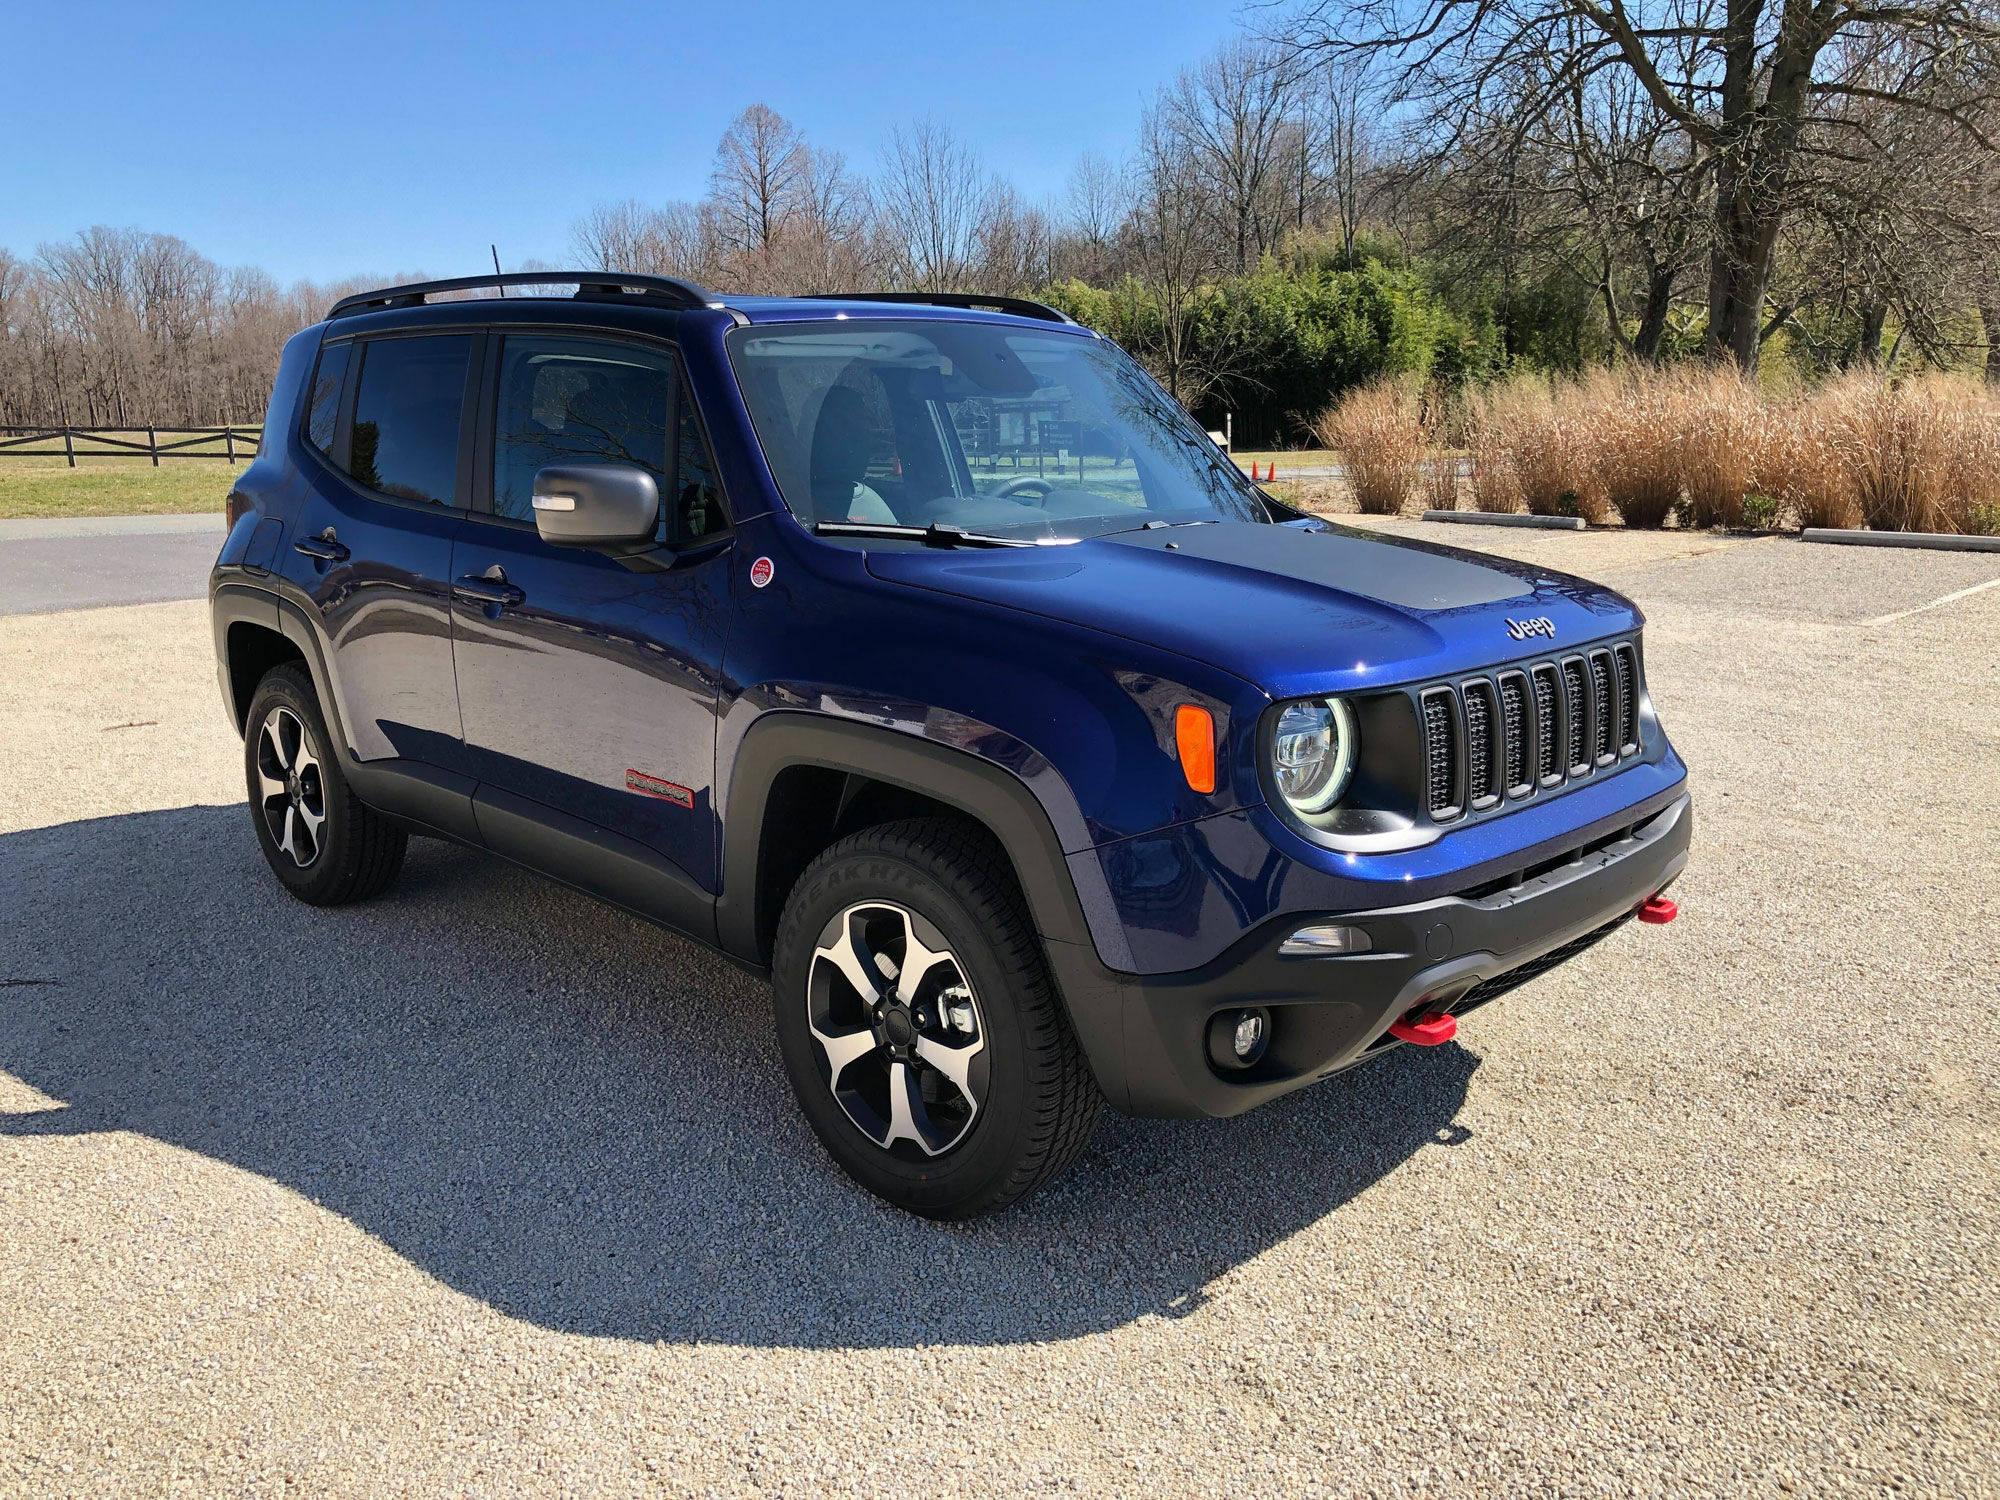 Car Review With A New Engine Jeep S Renegade Packs A Punch